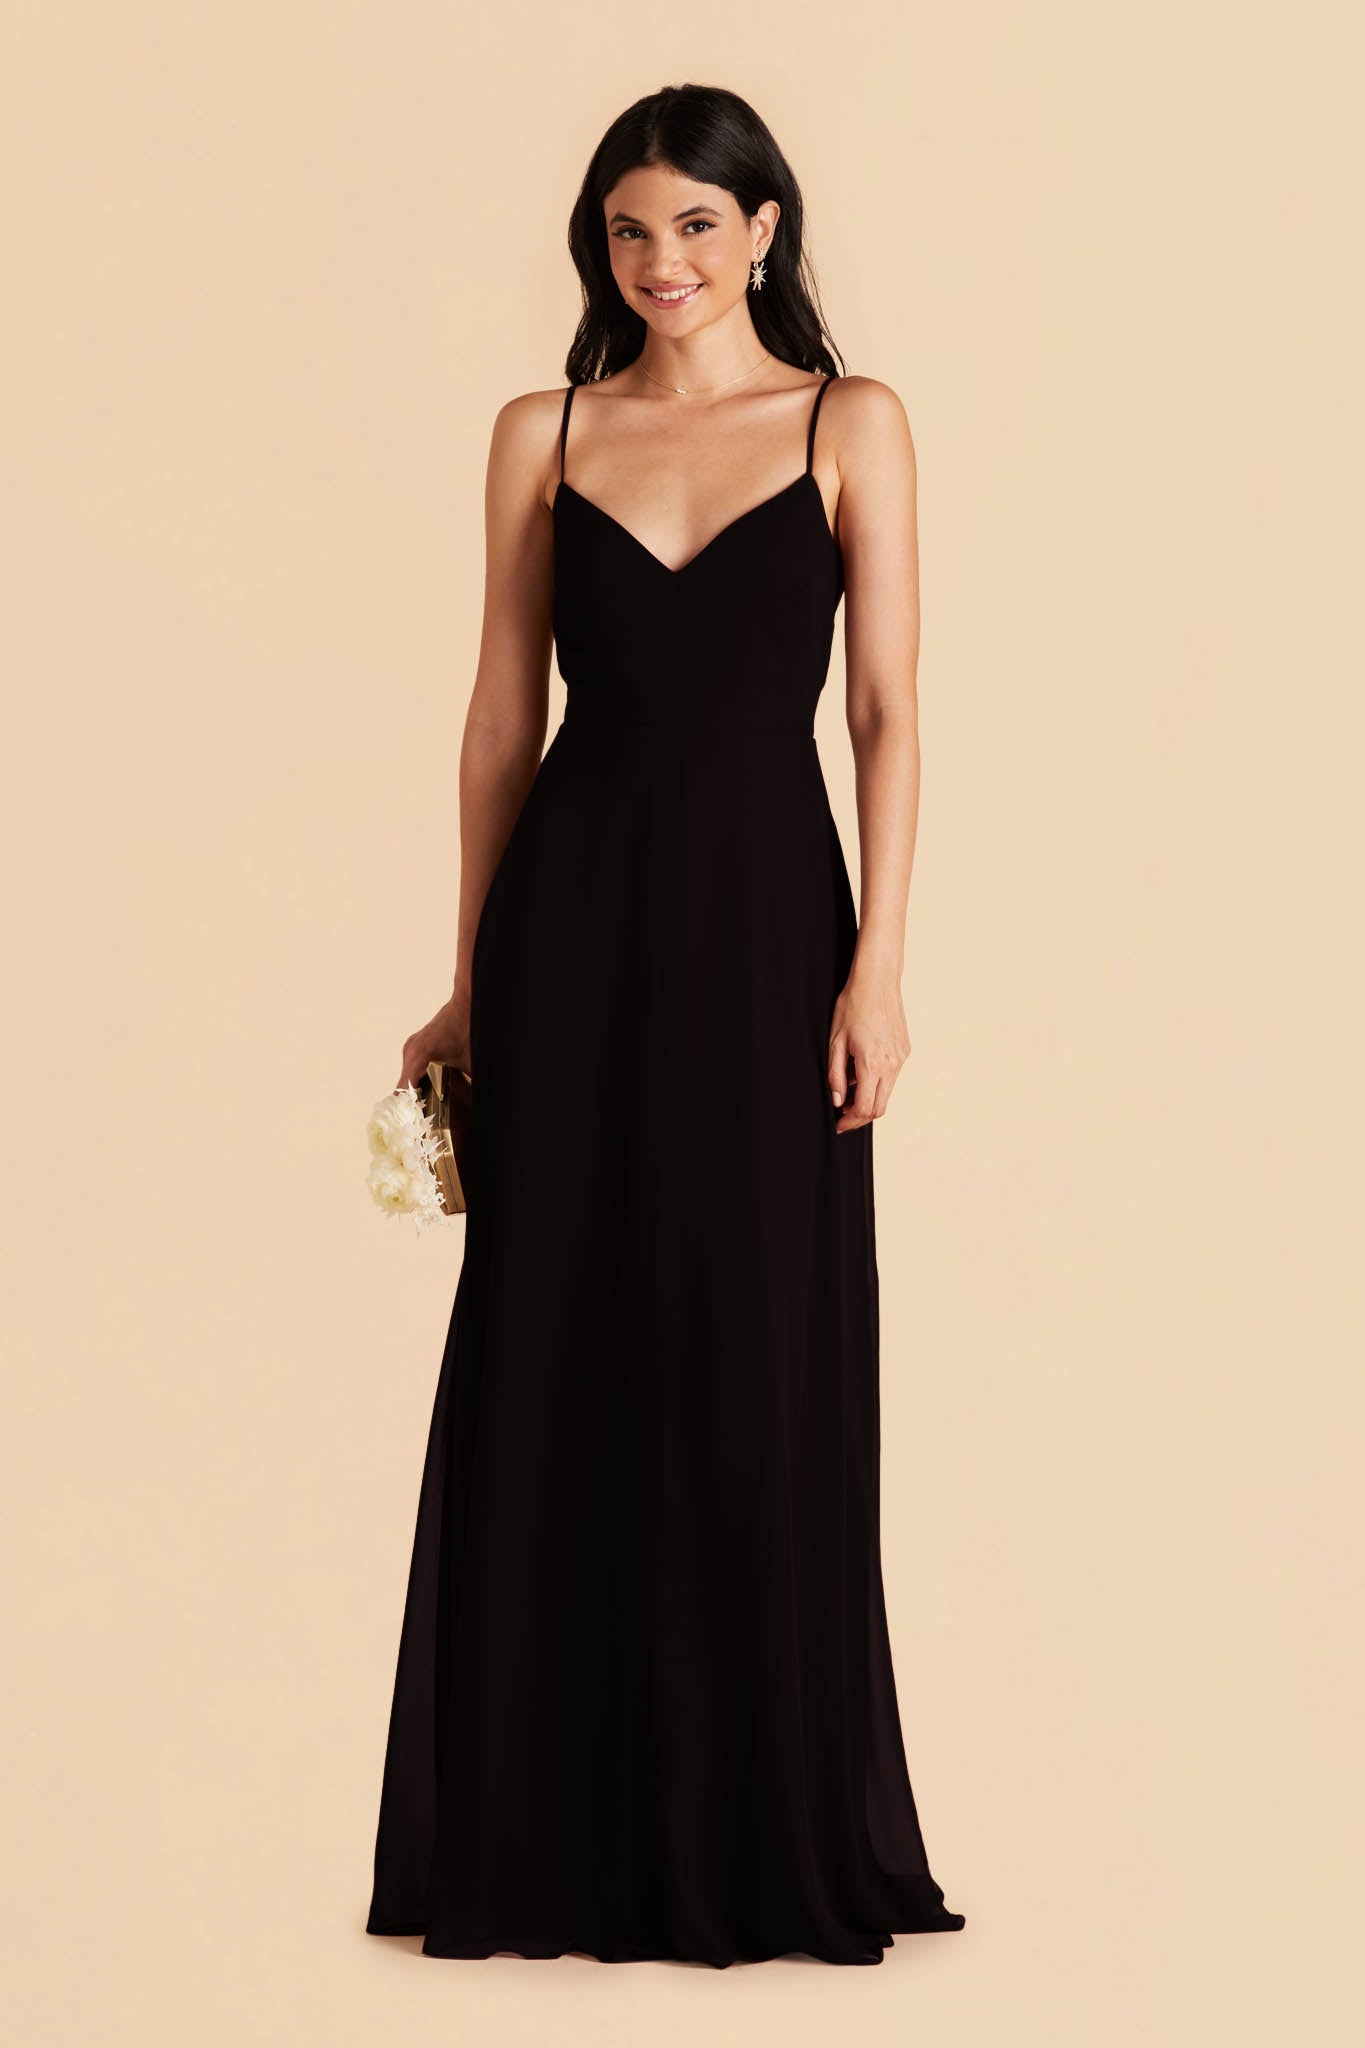 Long floor-sweeping black chiffon bridesmaid dress with a V-neckline and no sleeves